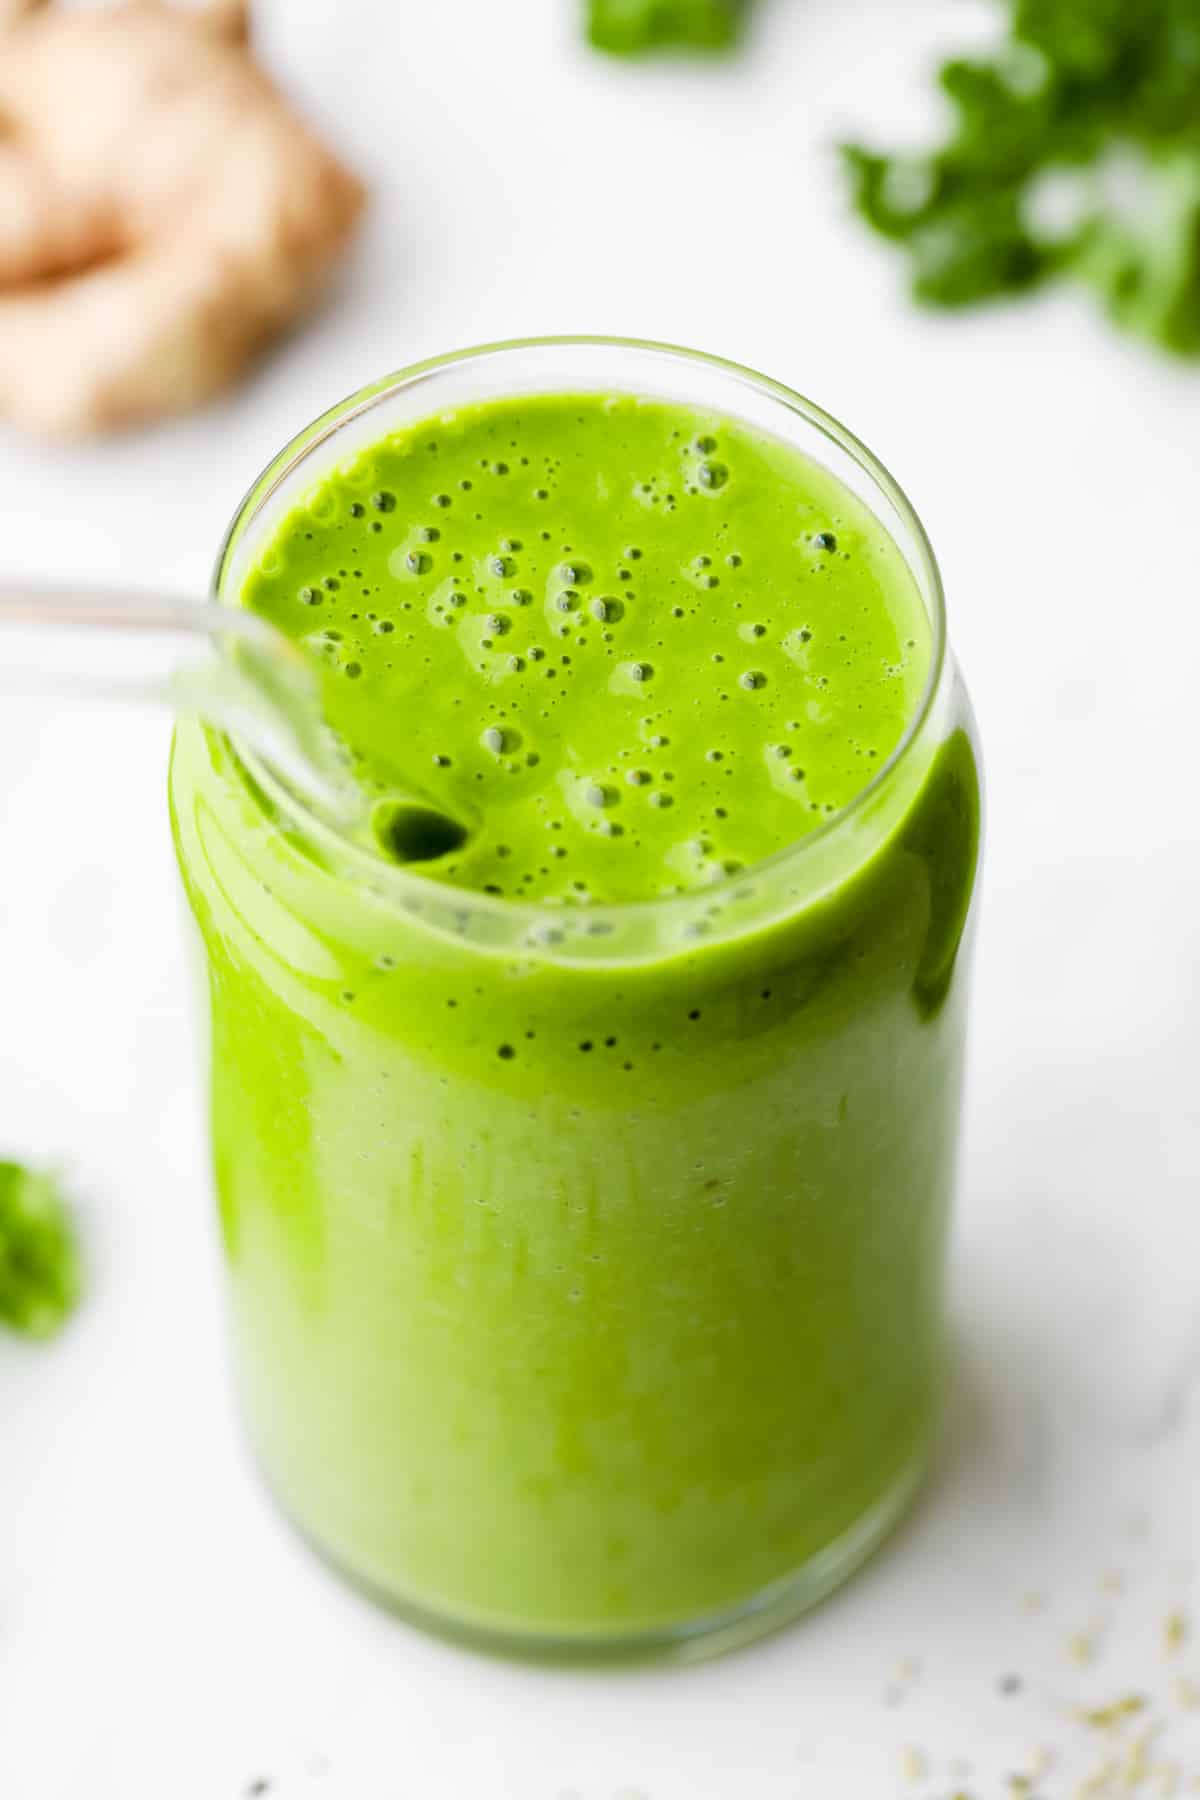 What 6 Smoothies With 20 Grams of Protein Look Like, Weight Loss